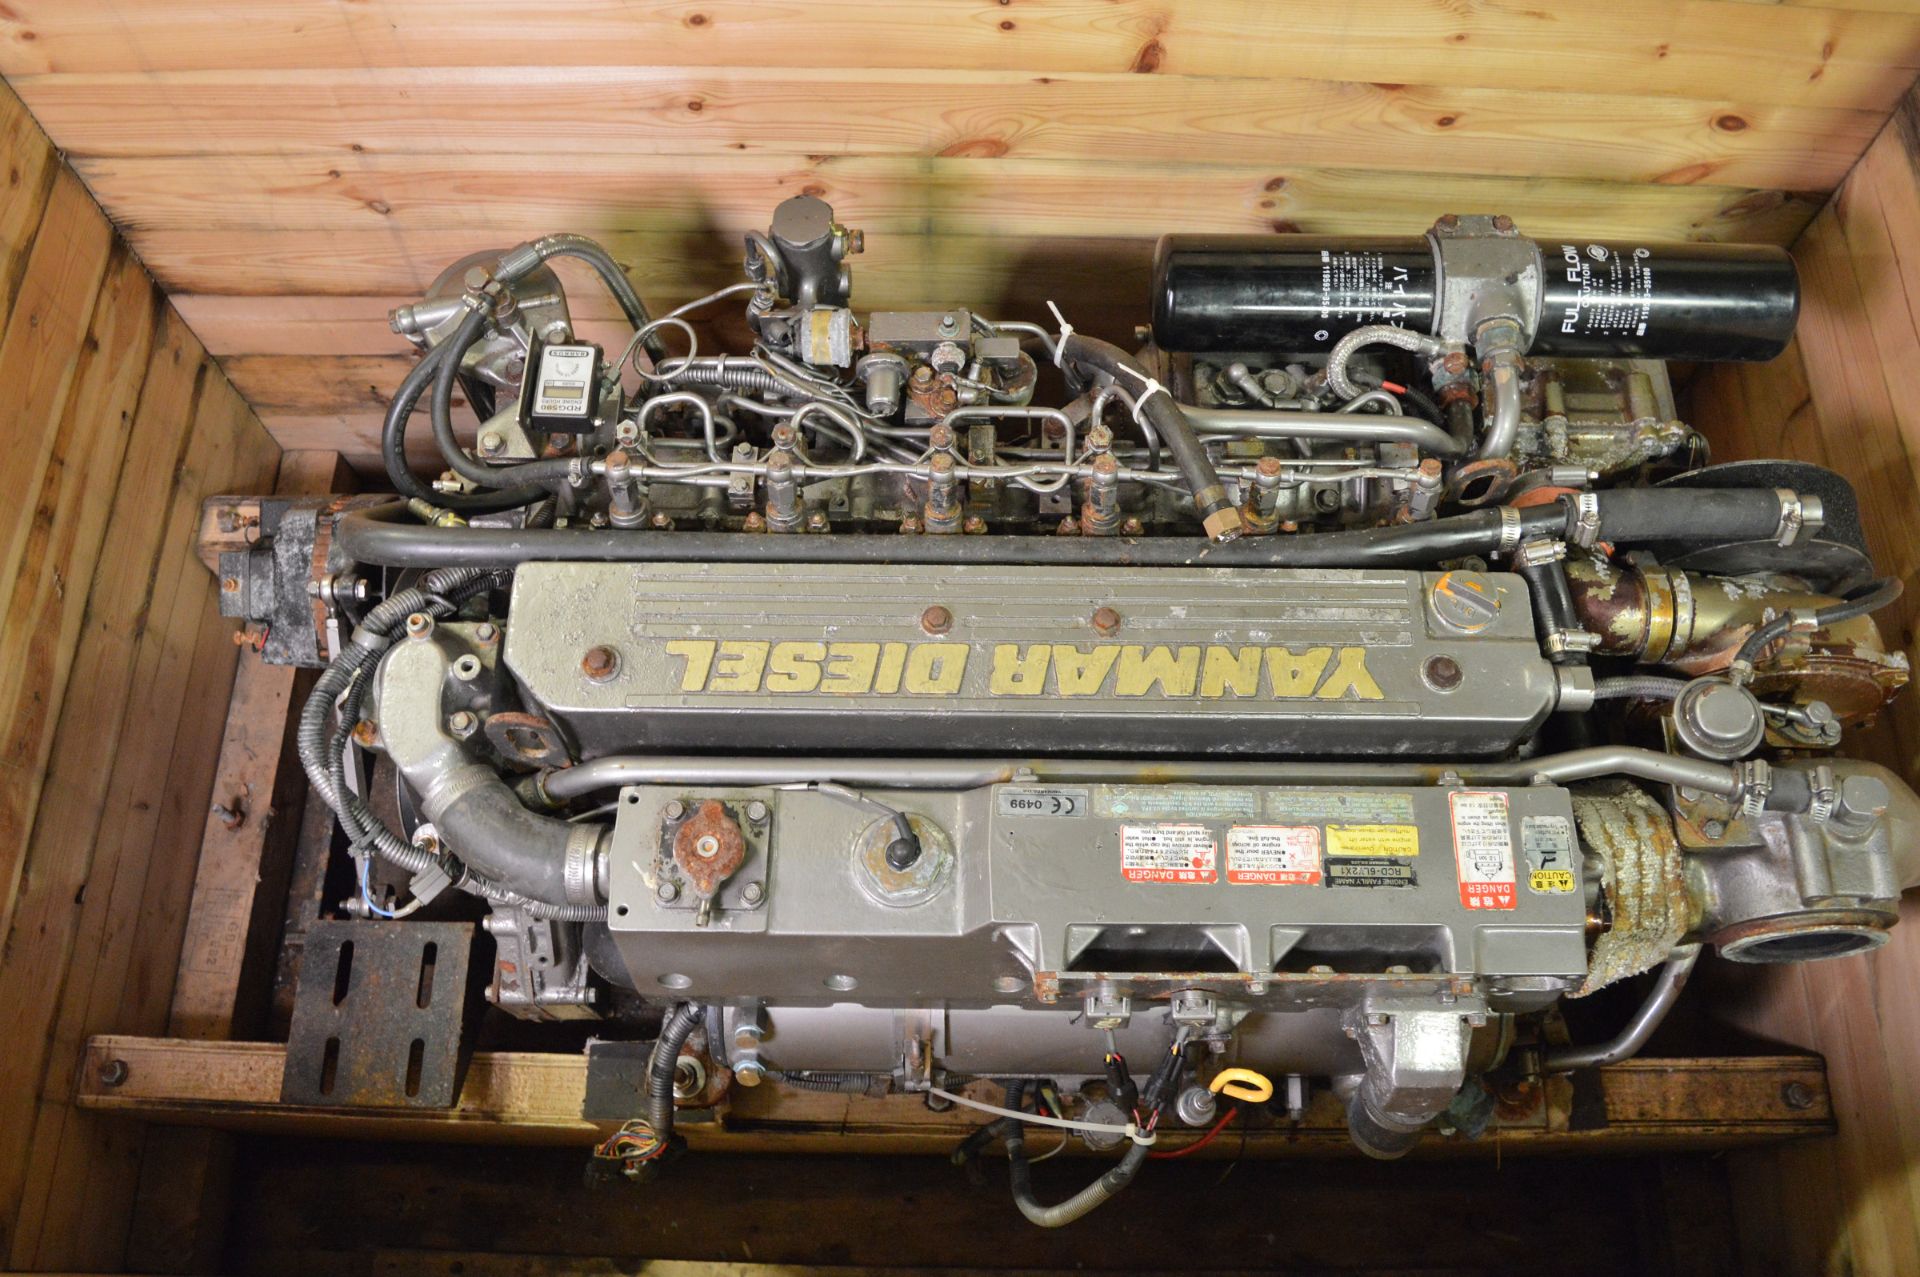 Yanmar RCD-6LY2X1 Diesel Boat Engine - 6LY2A-STP - 324kW (434HP) - for specification go to - Image 11 of 21